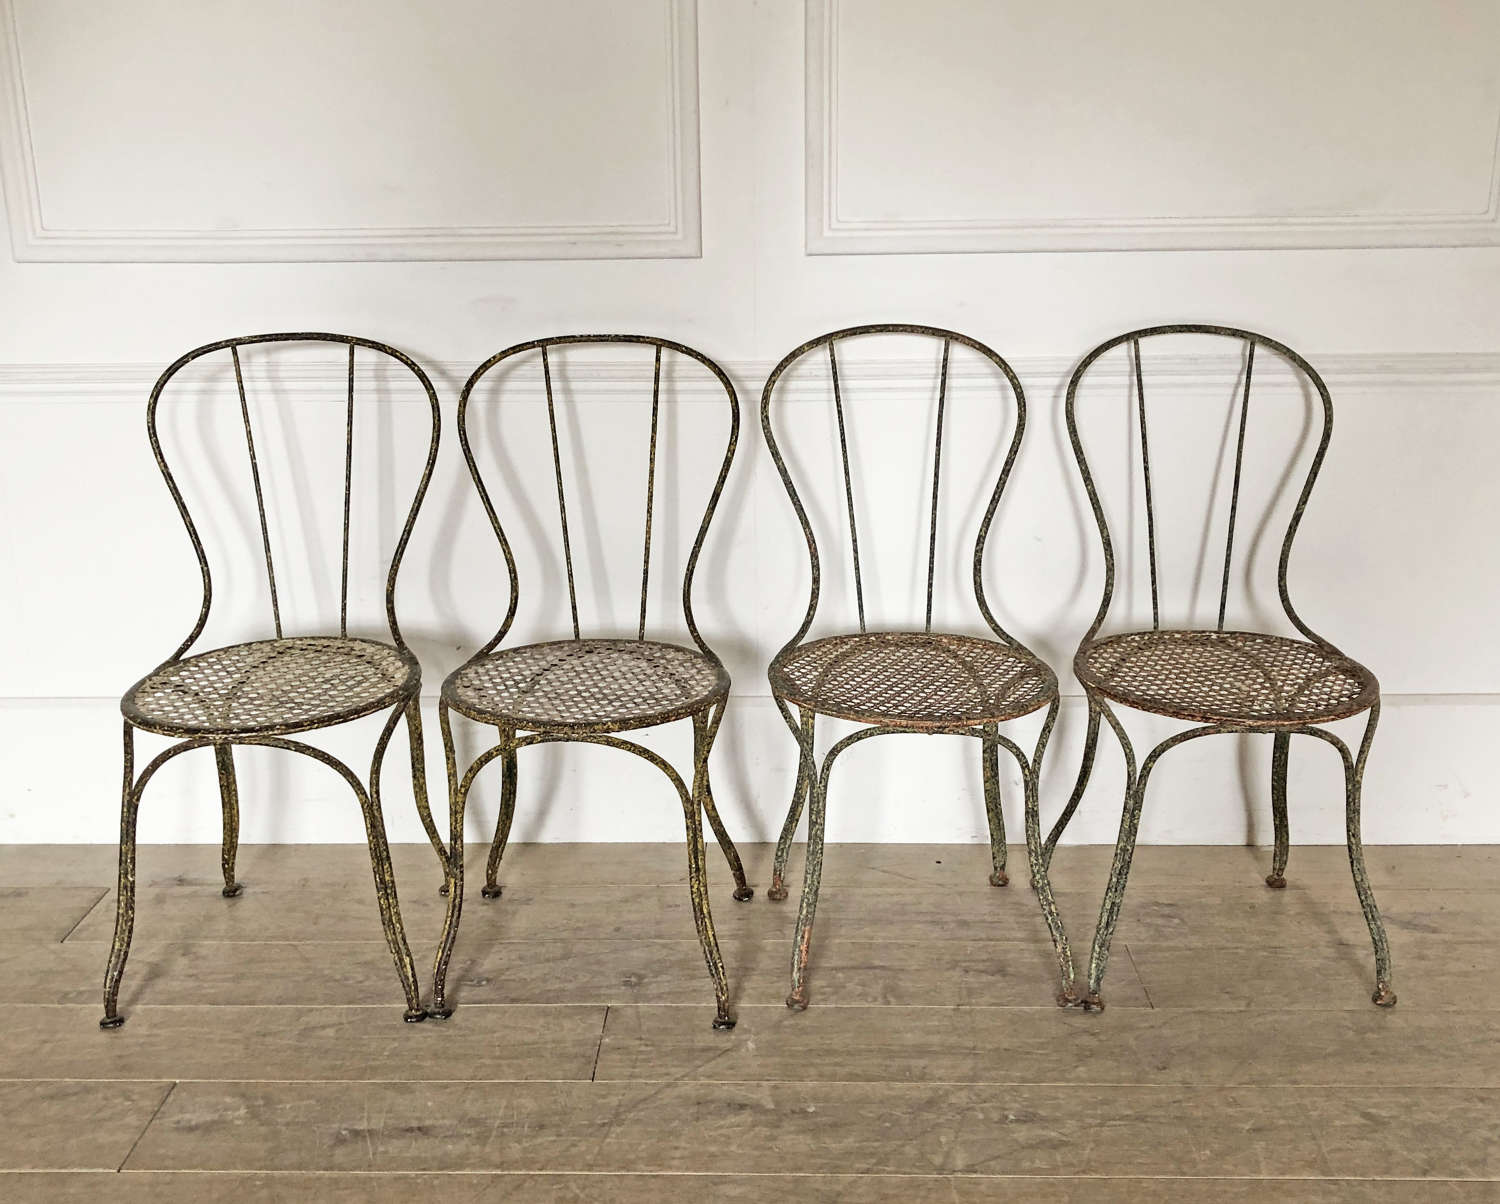 Set of 4 19th c French Iron Garden Chairs - circa 1890